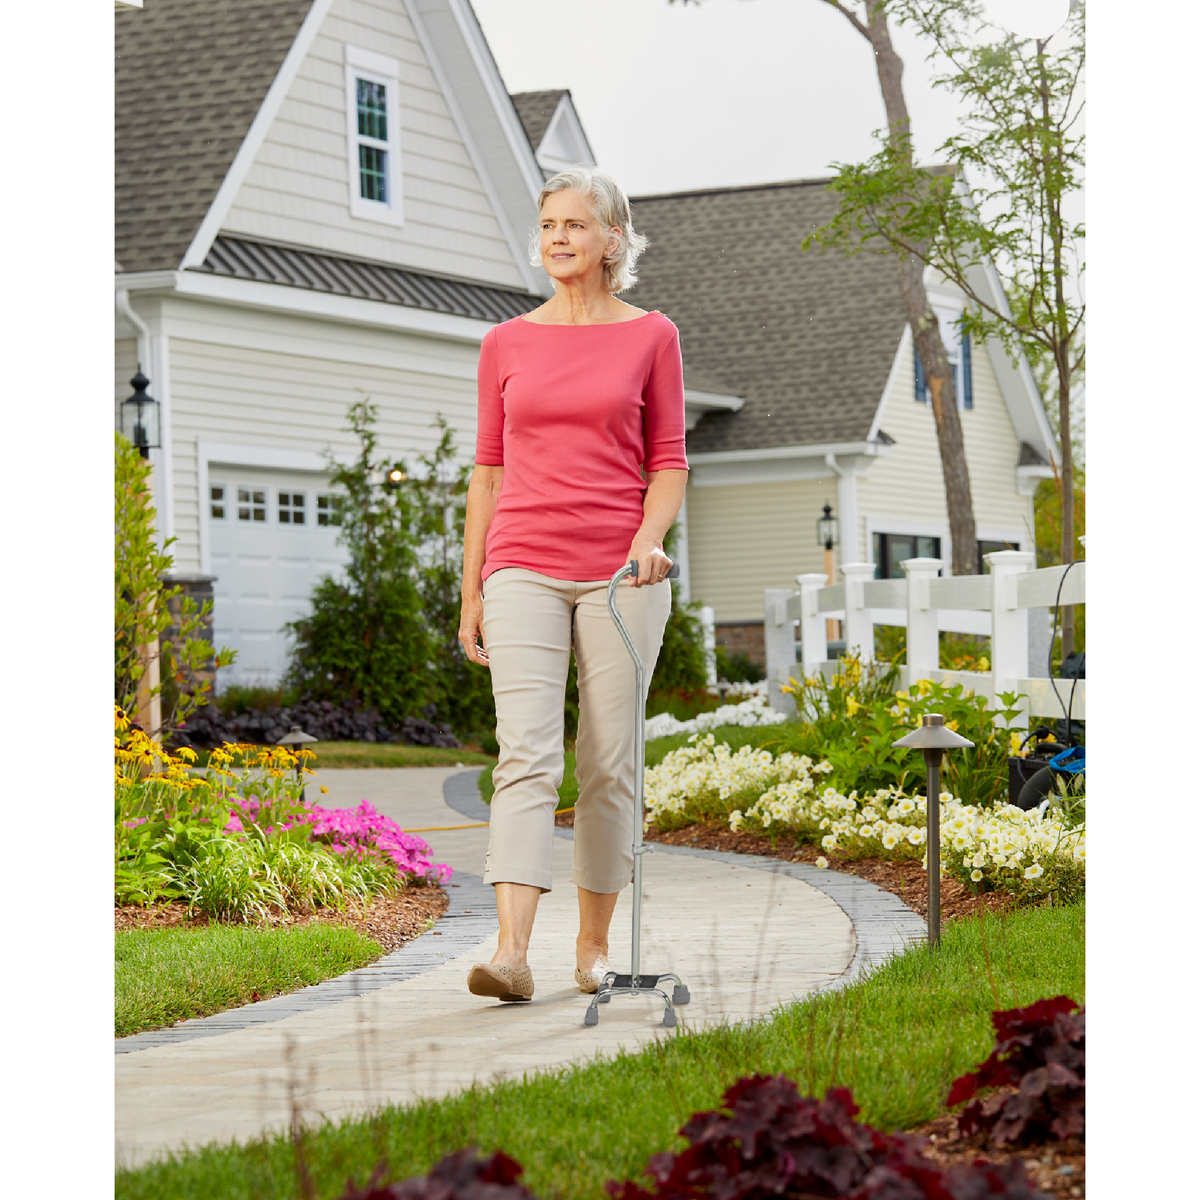 A woman walking outside in a neighbourhood with the Carex Small Base Offset Quad Cane